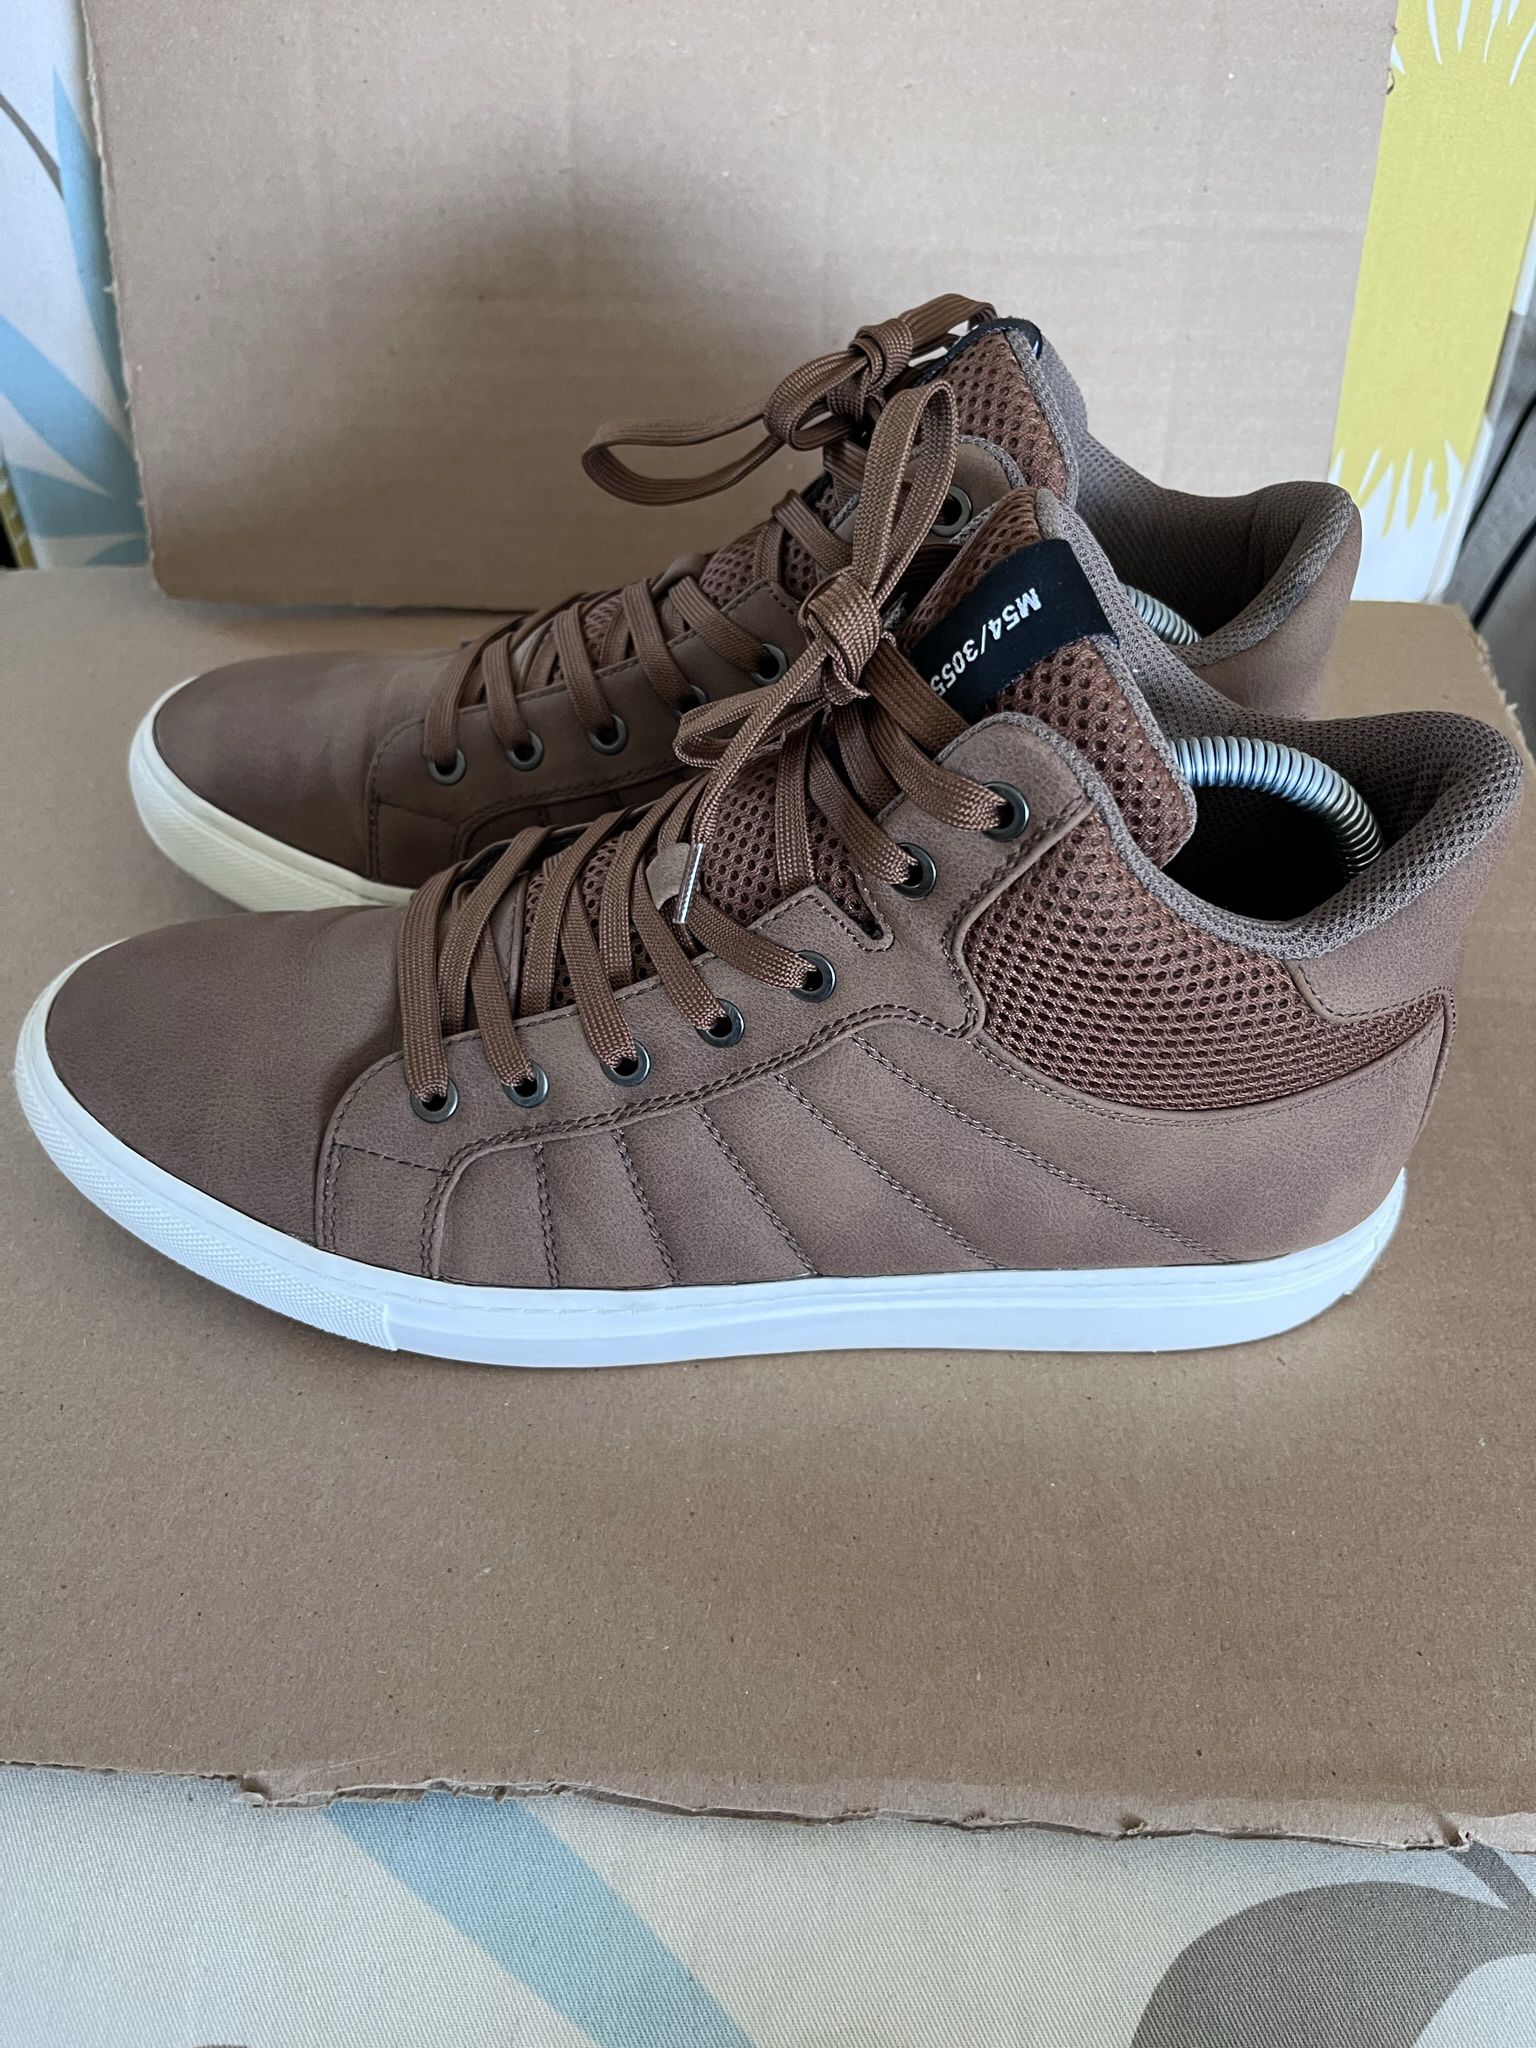 H&M Shoes Mens 10 High Tops Sneakers Brown Faux Leather Lace Up Casual  Comfort for Sale in Huntington Beach, CA - OfferUp